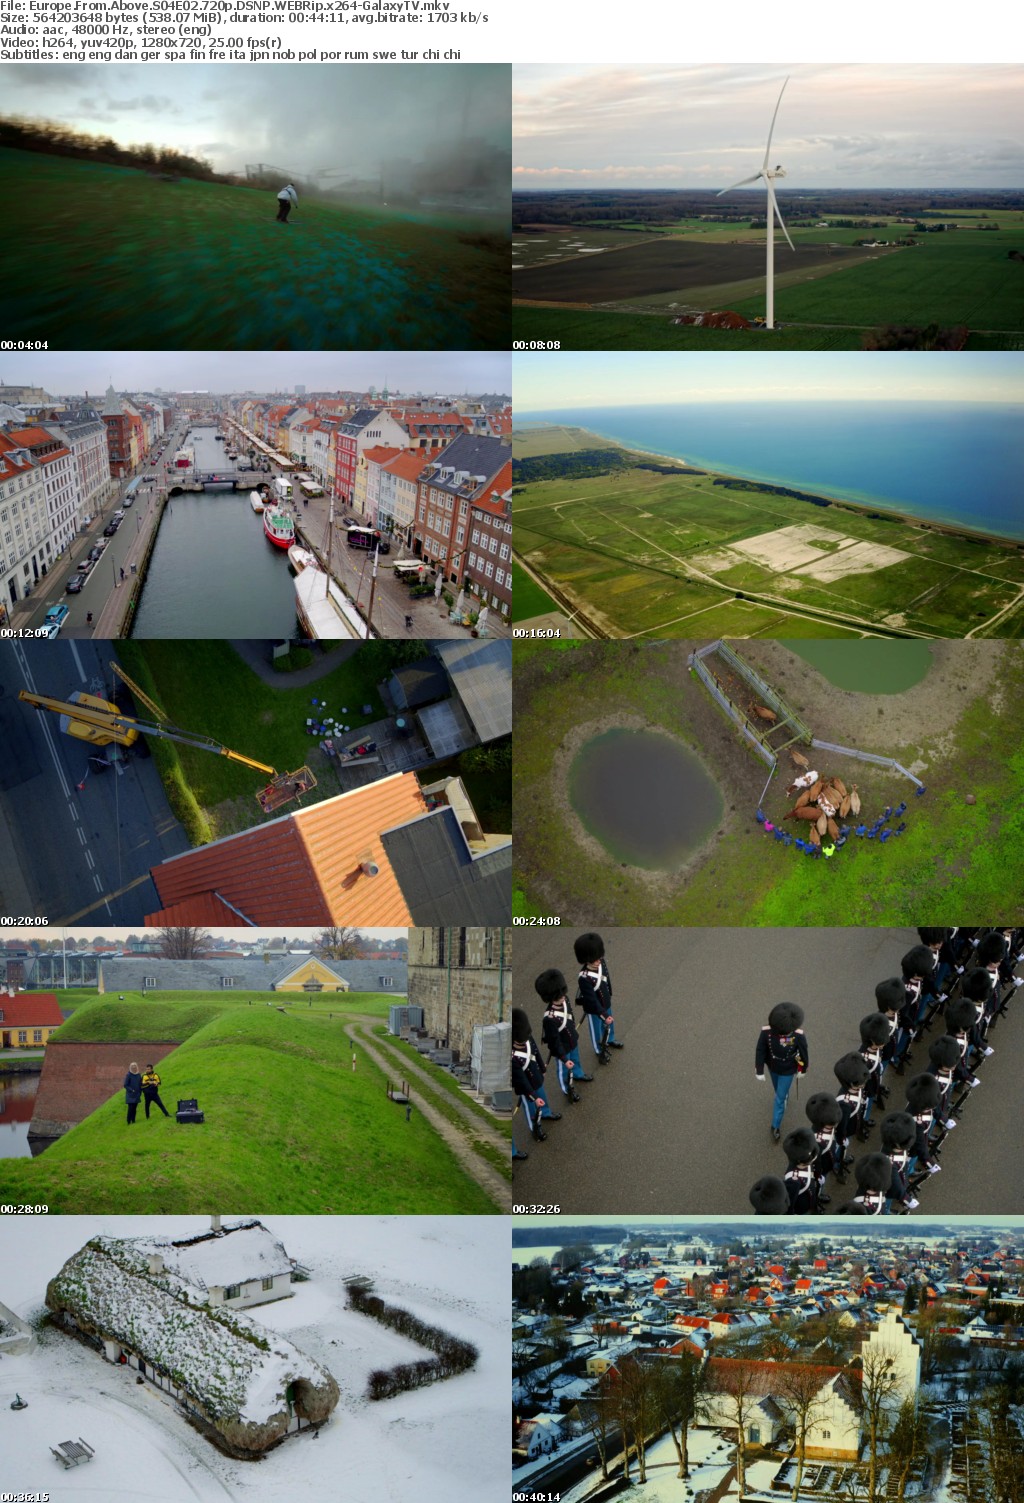 Europe From Above S04 COMPLETE 720p DSNP WEBRip x264-GalaxyTV